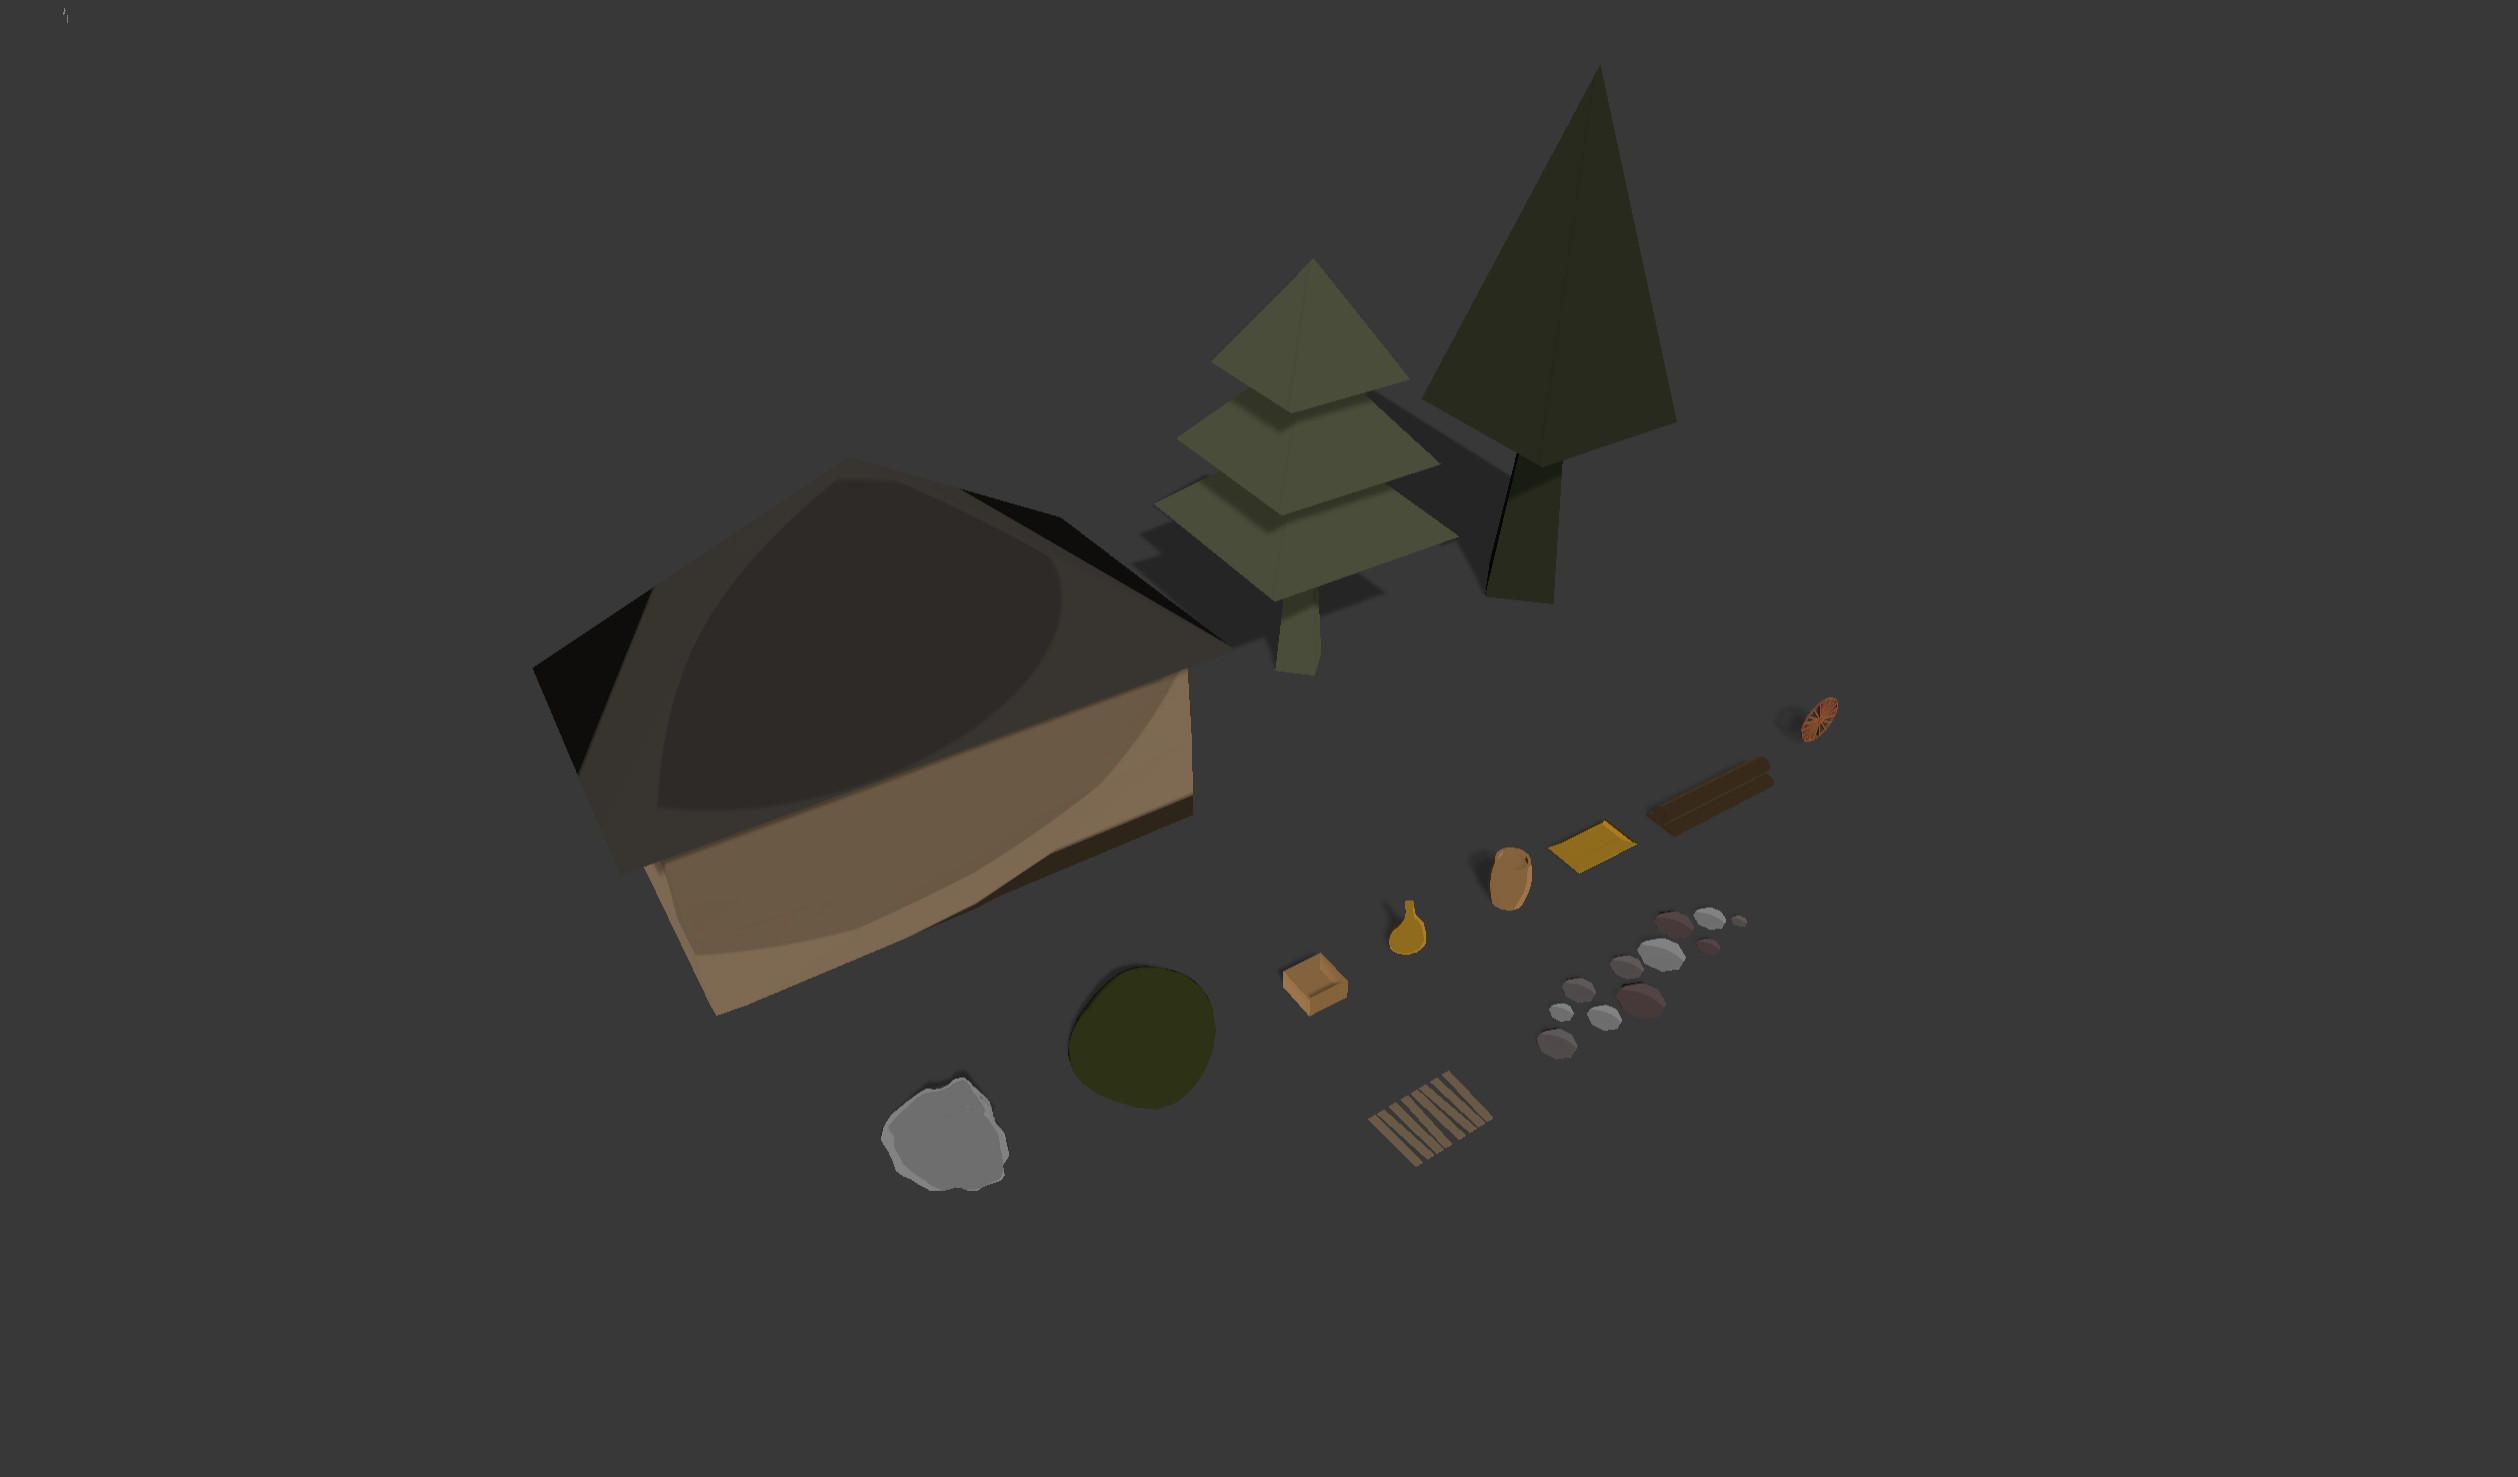 Low poly assets I made in 3DsMax for game.